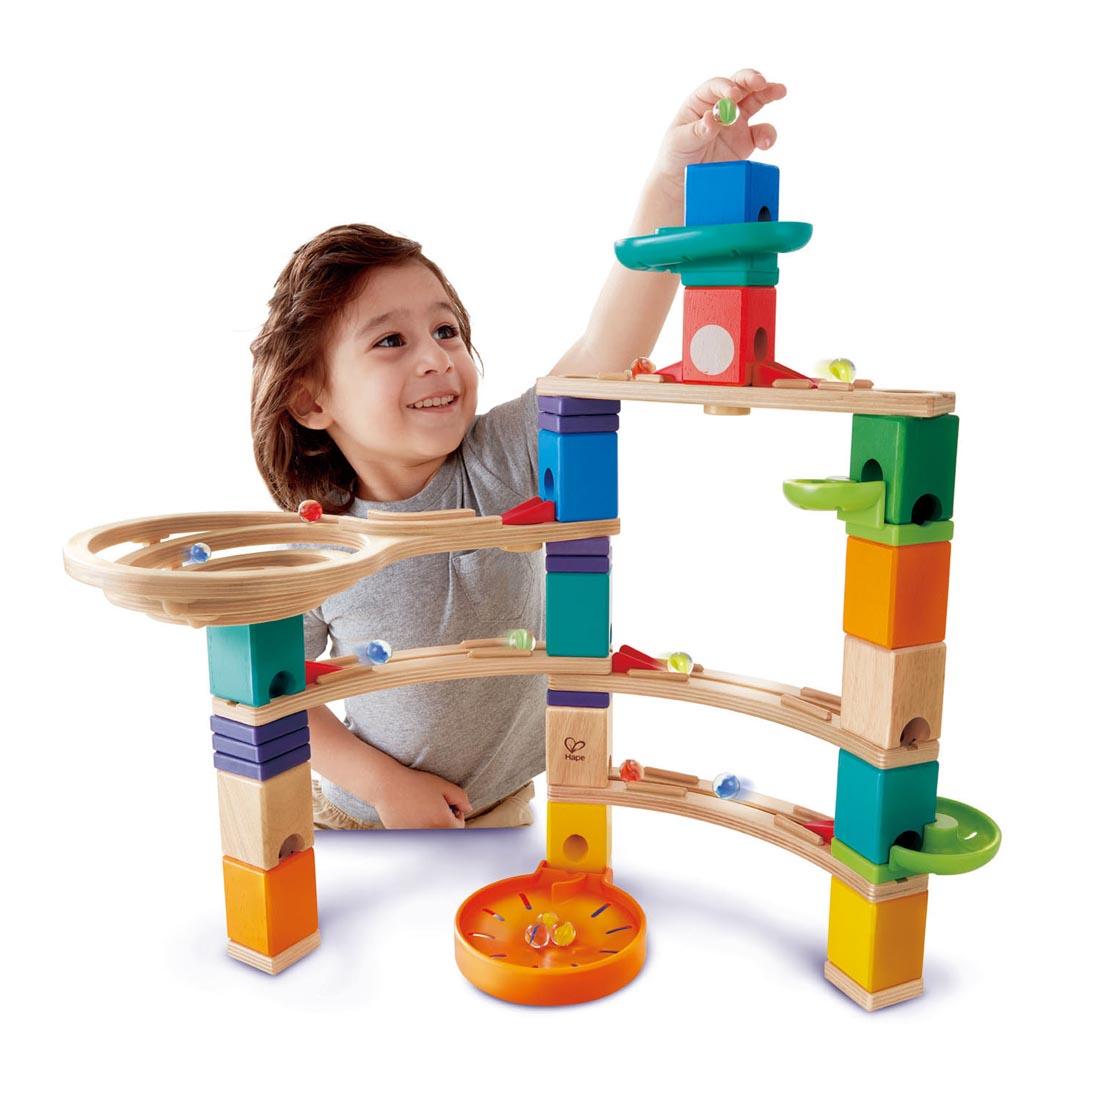 Child playing with an assembled Quadrilla Cliffhanger Wooden Marble Run Set By Hape